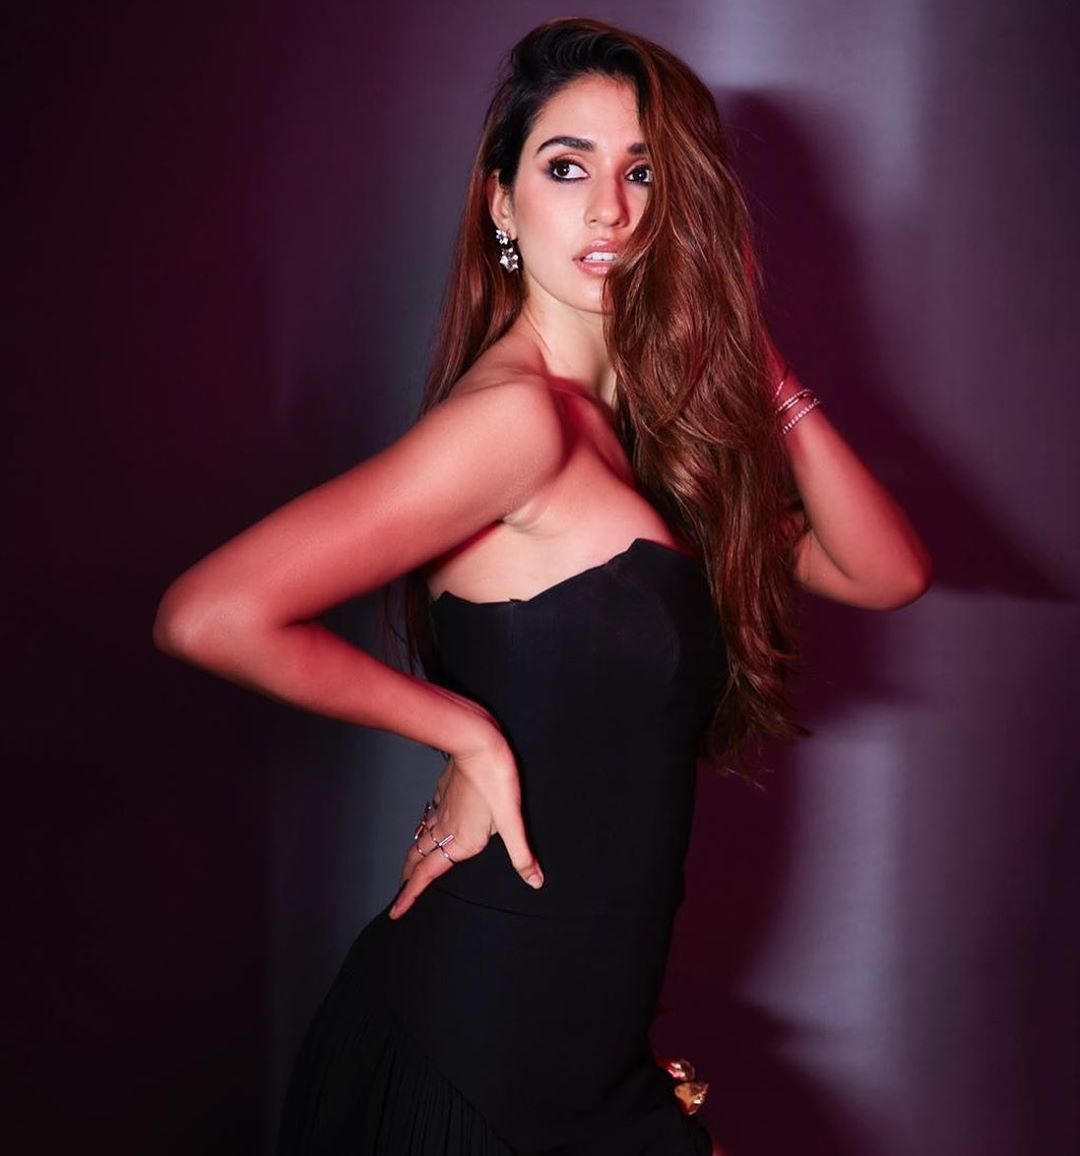 Disha Patani Got Inspired From Angelina Jolie For Malang Says, "She Is The Best Baddie In The World"